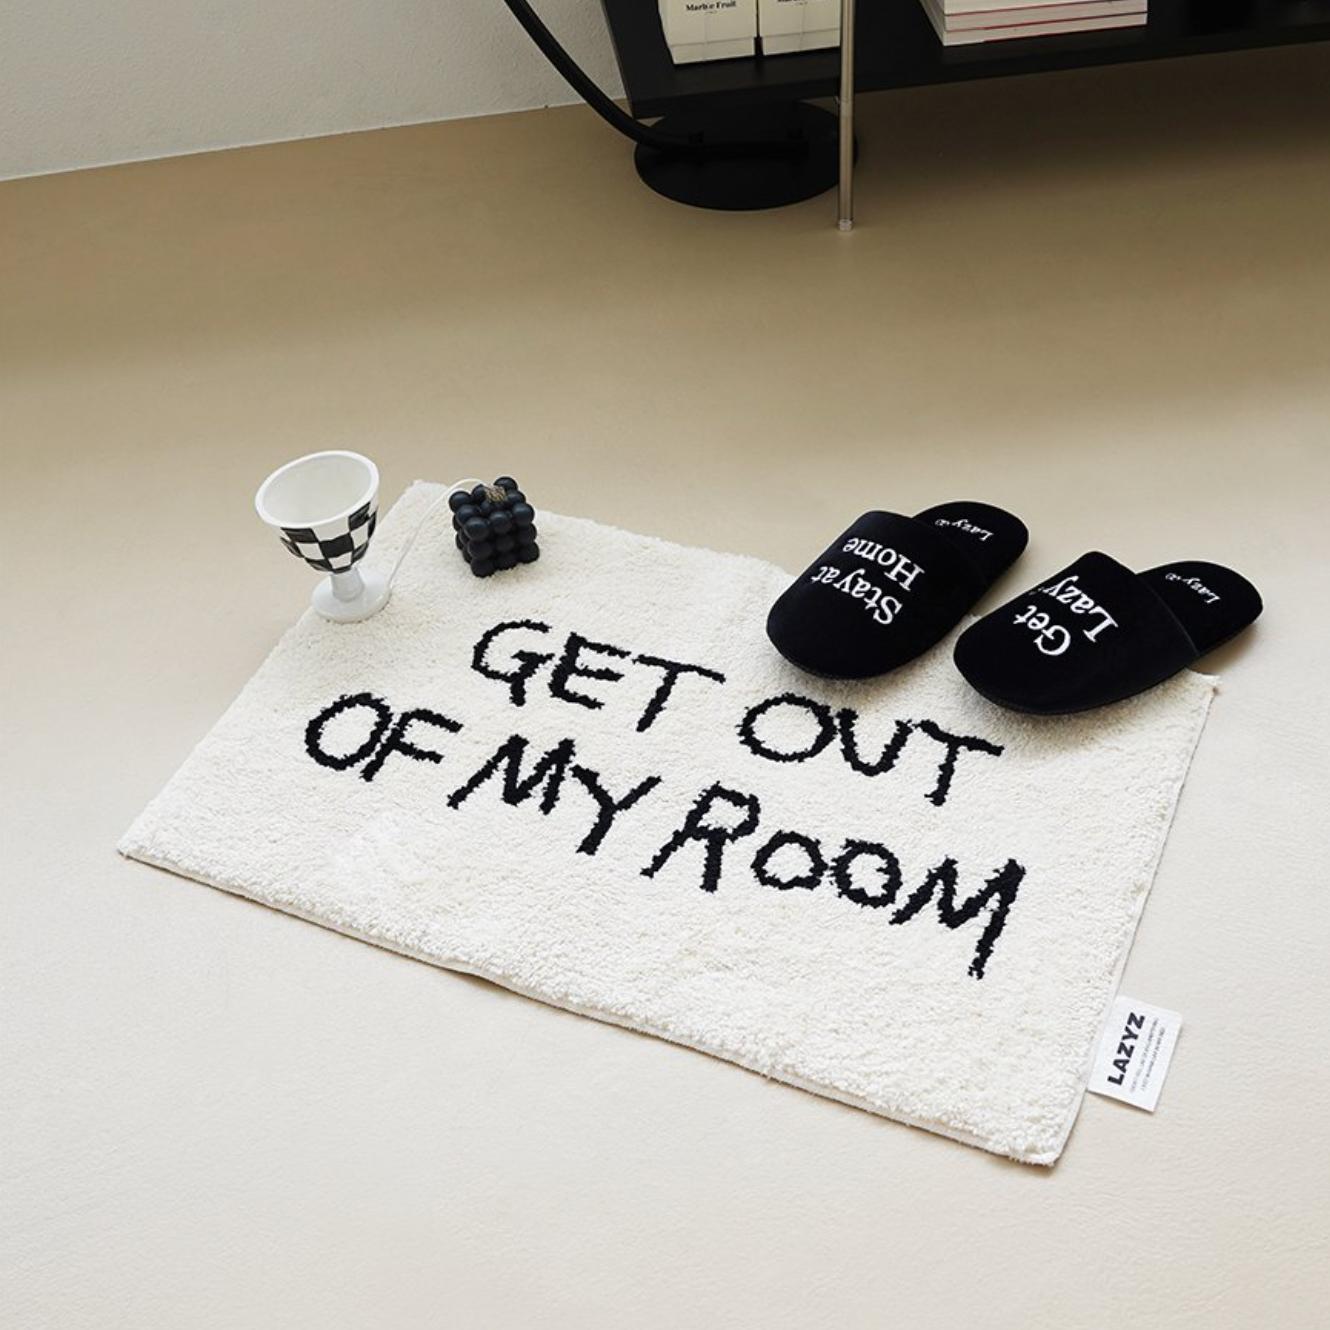 mini rug | GET OUT OF MY ROOM